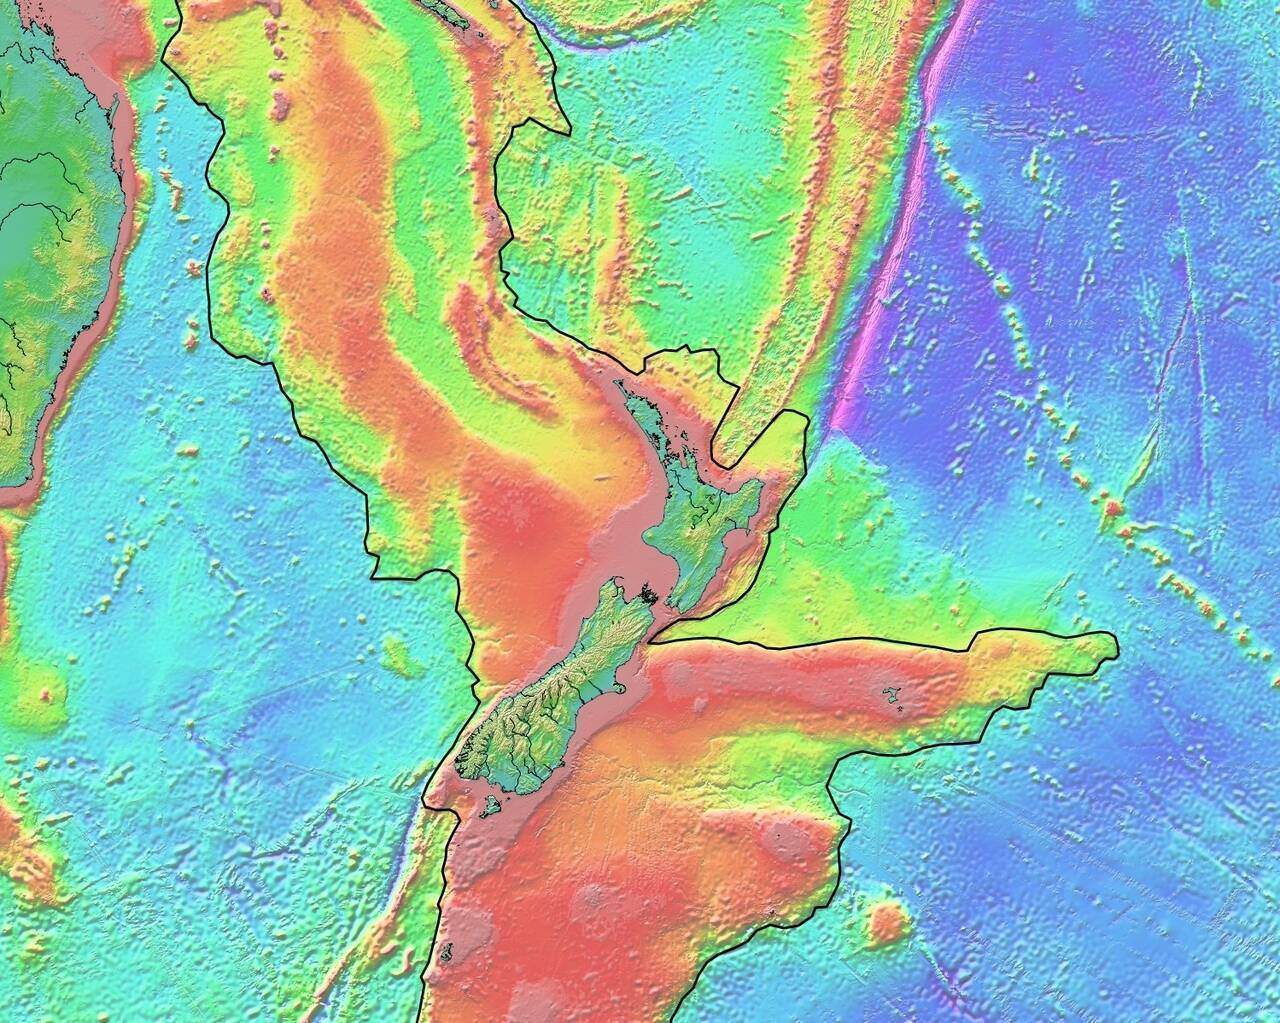 A continent lost for 375 years has been found